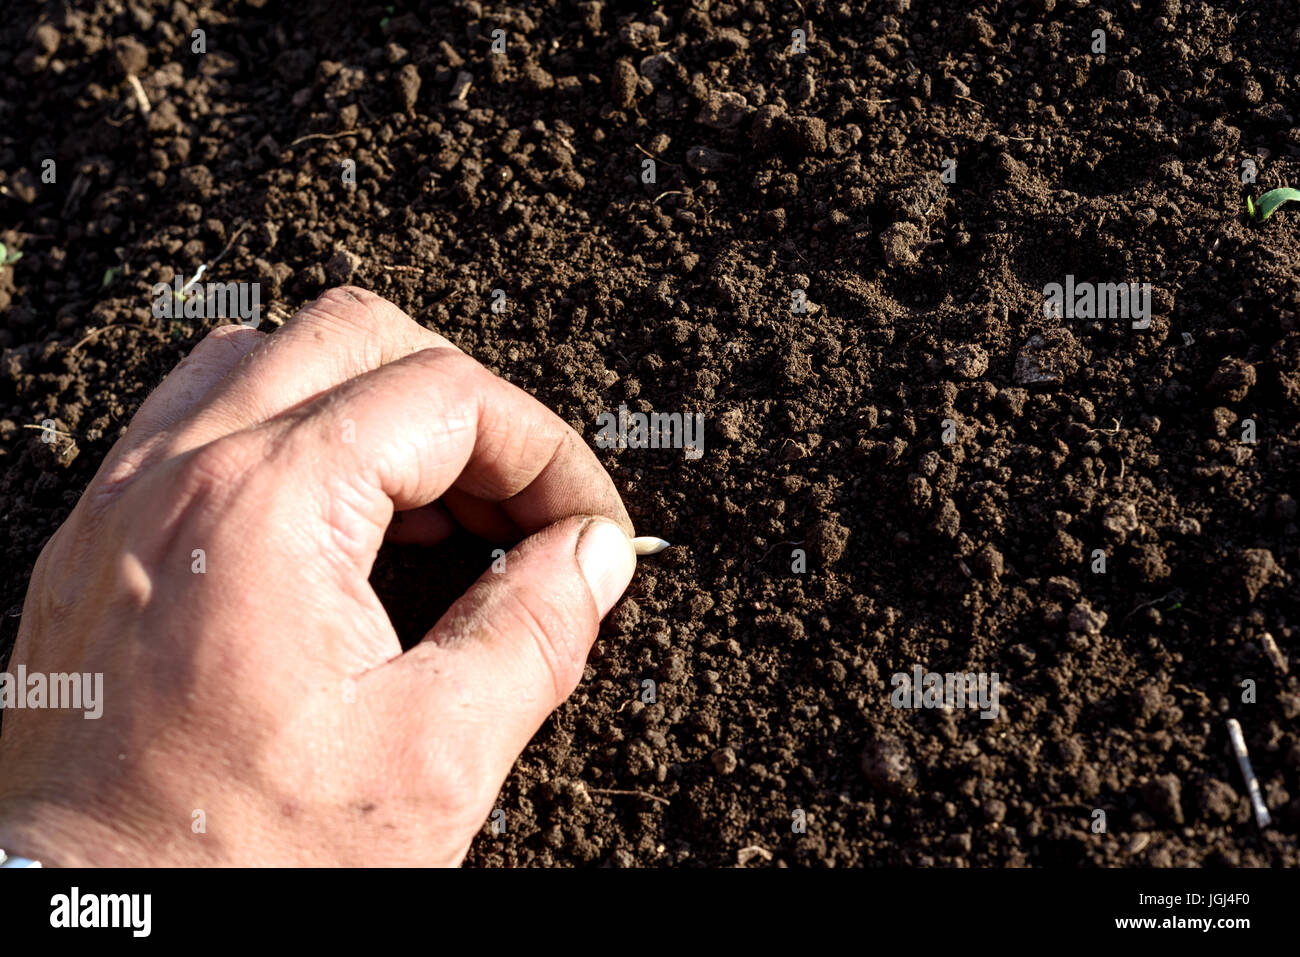 White male arm hand and fingers planting a cucumber seed into fresh brown soil. The earth in the garden is not watered. Shot in natural sunlight. Stock Photo